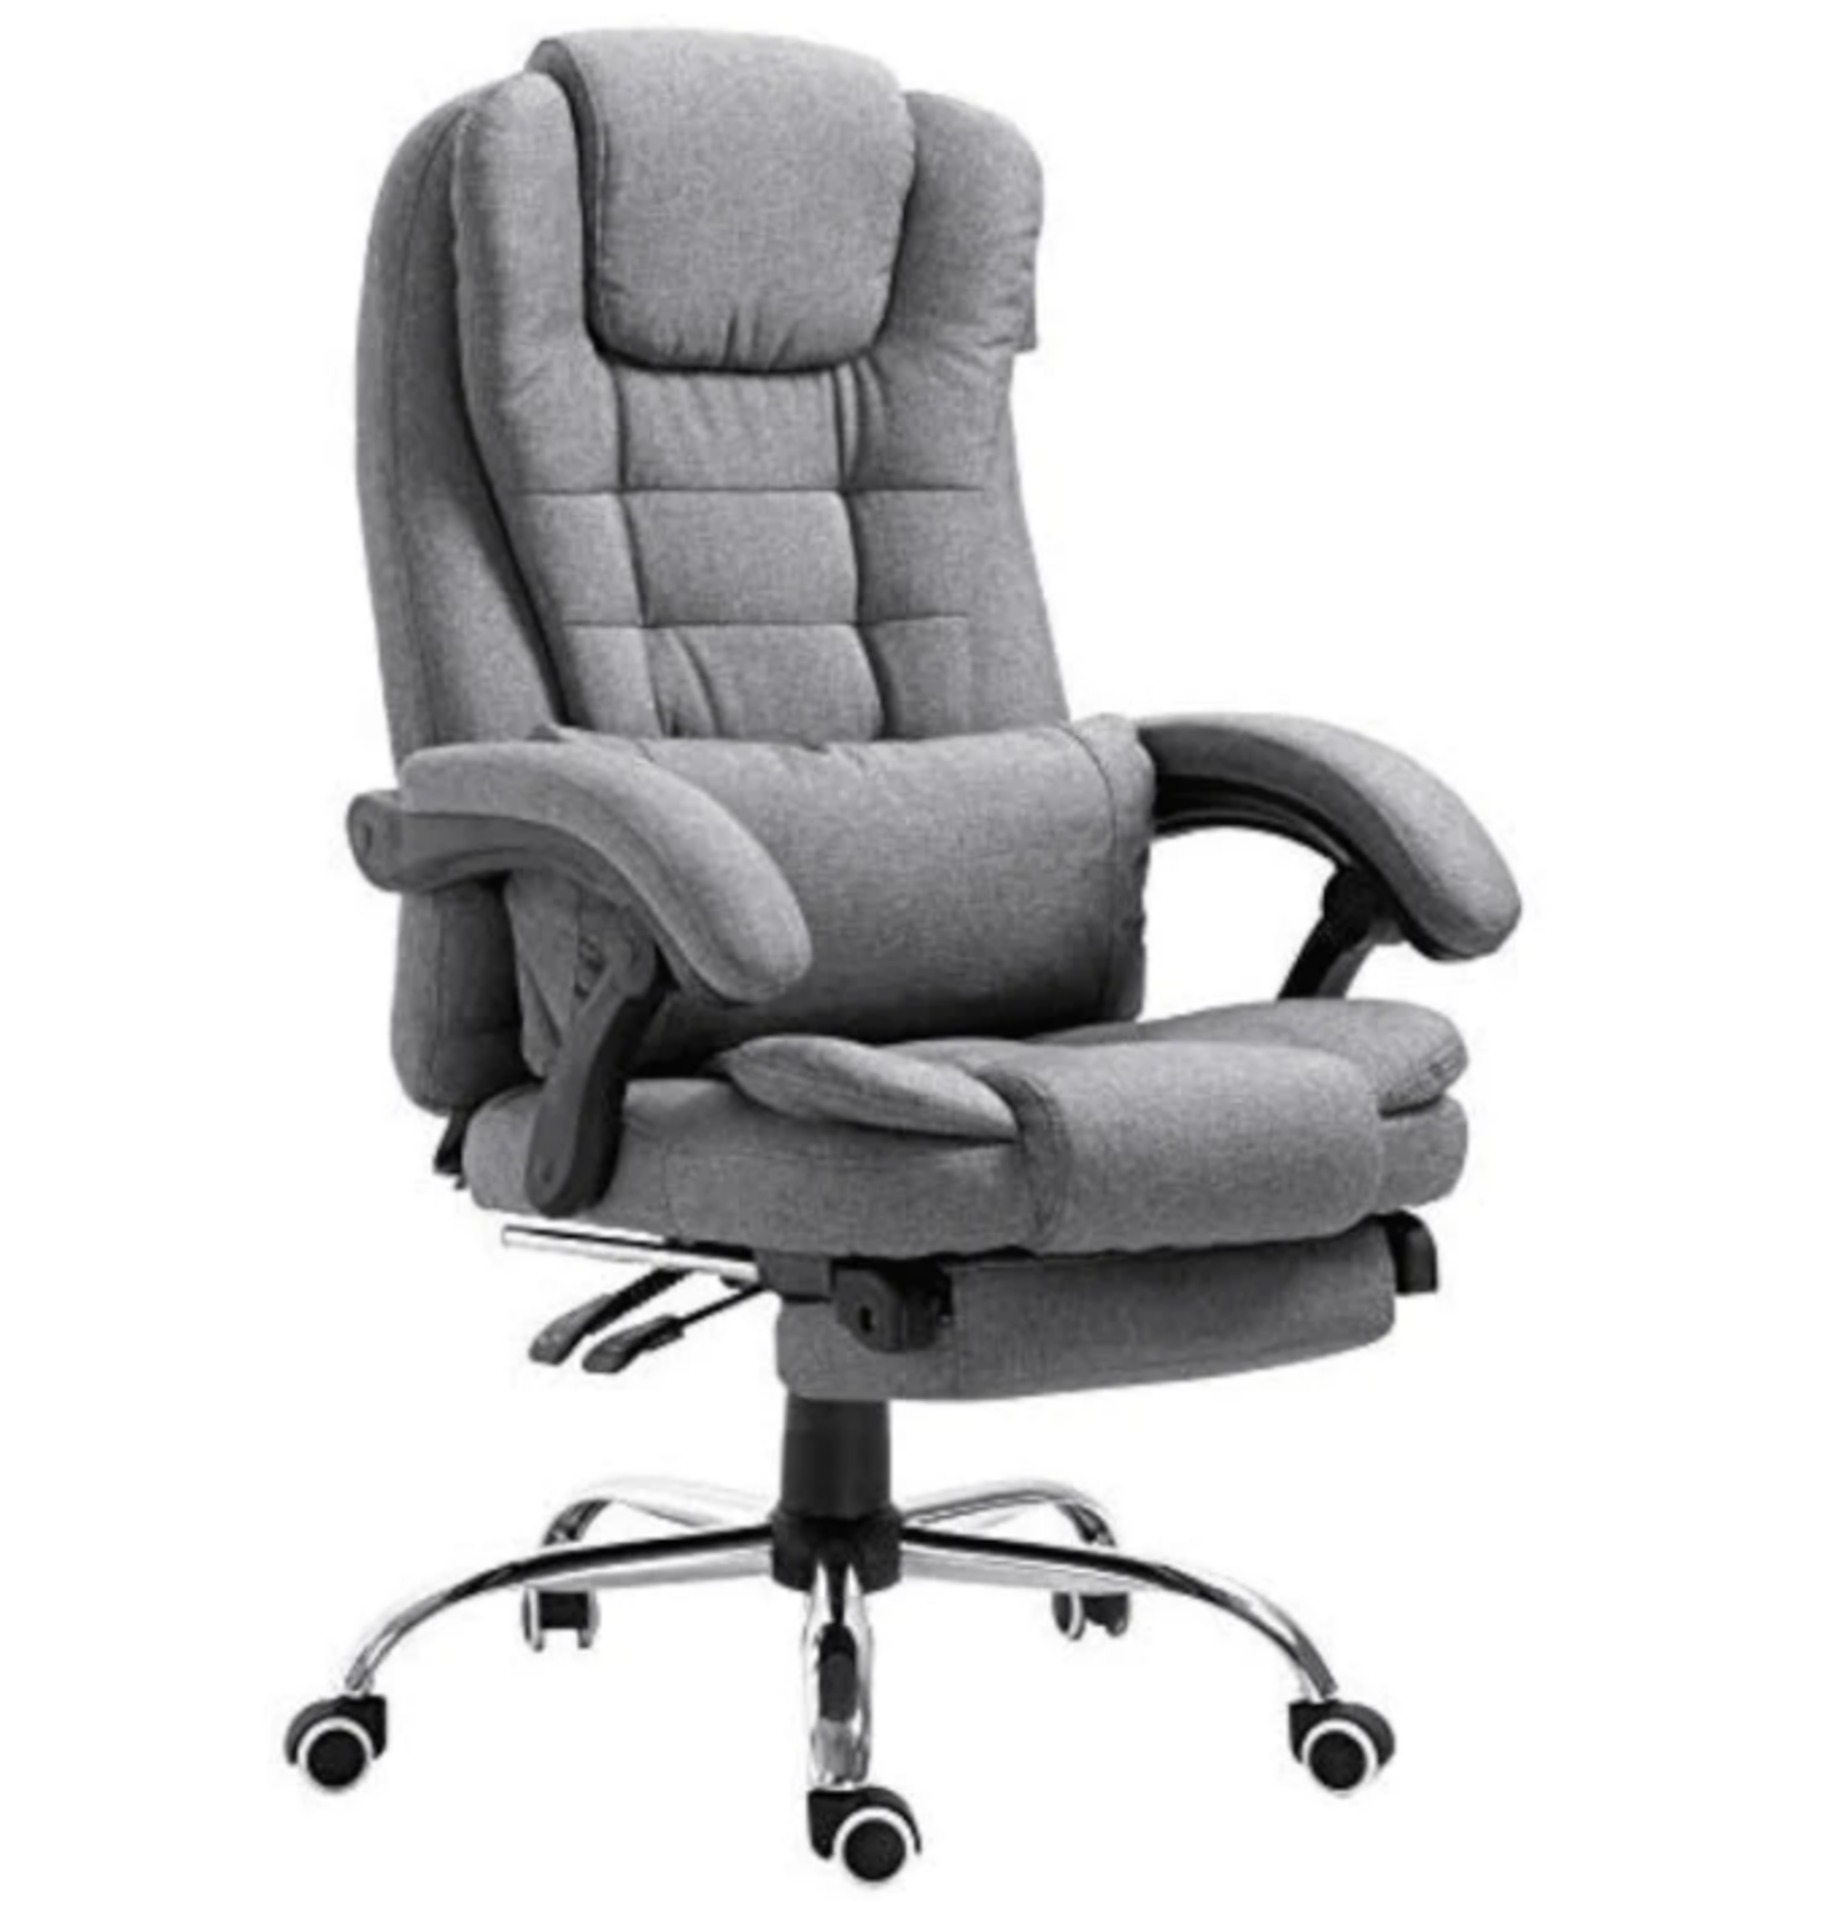 Executive Reclining Computer Desk Chair with Footrest (SR6).Luxury reclining office chair with extra